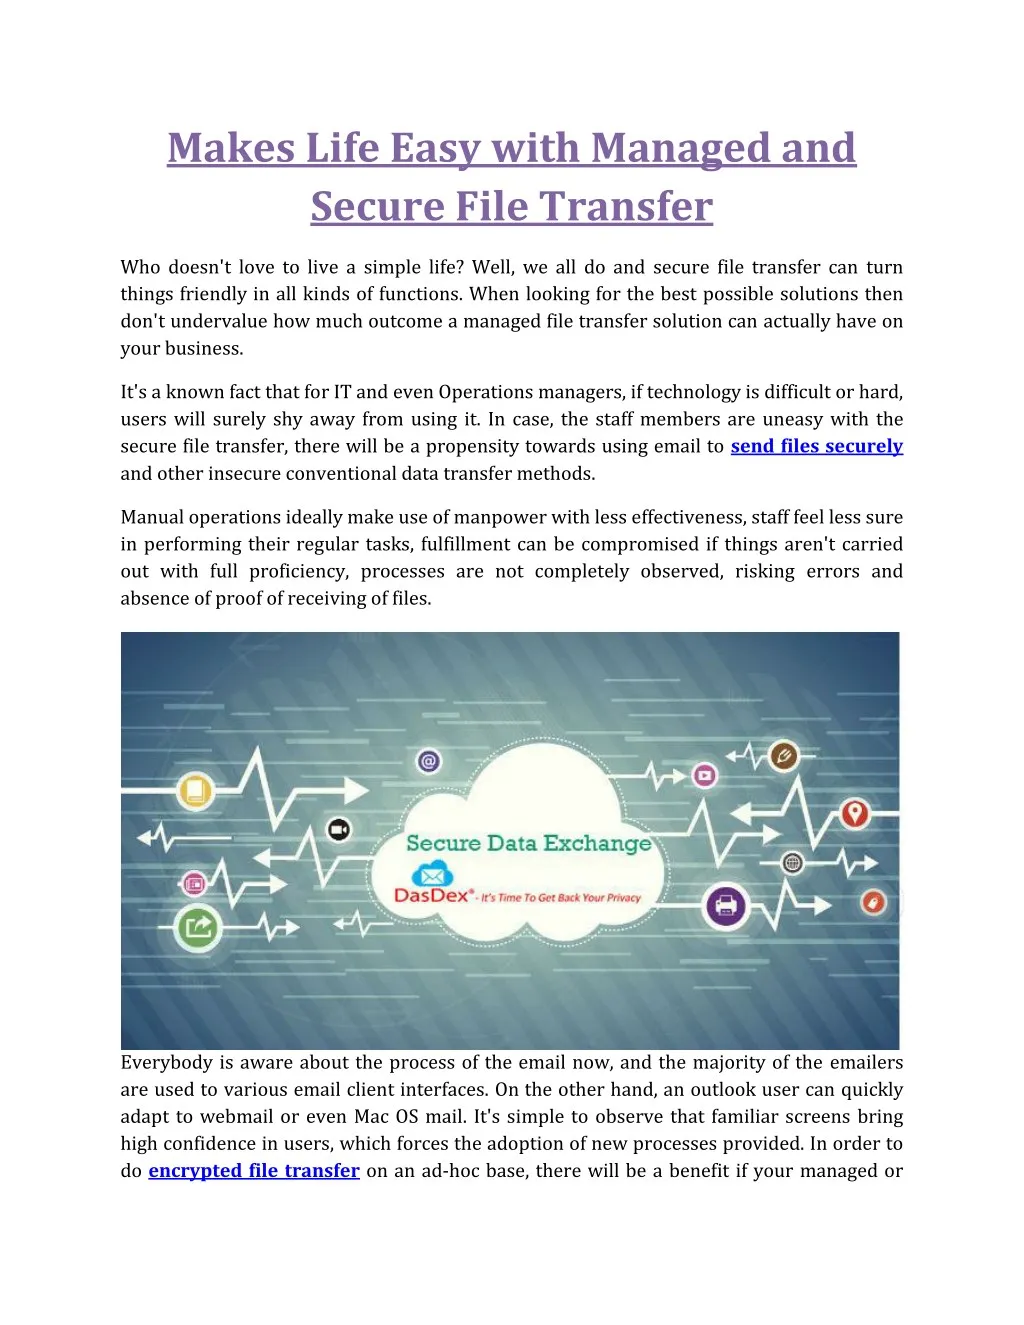 makes life easy with managed and secure file